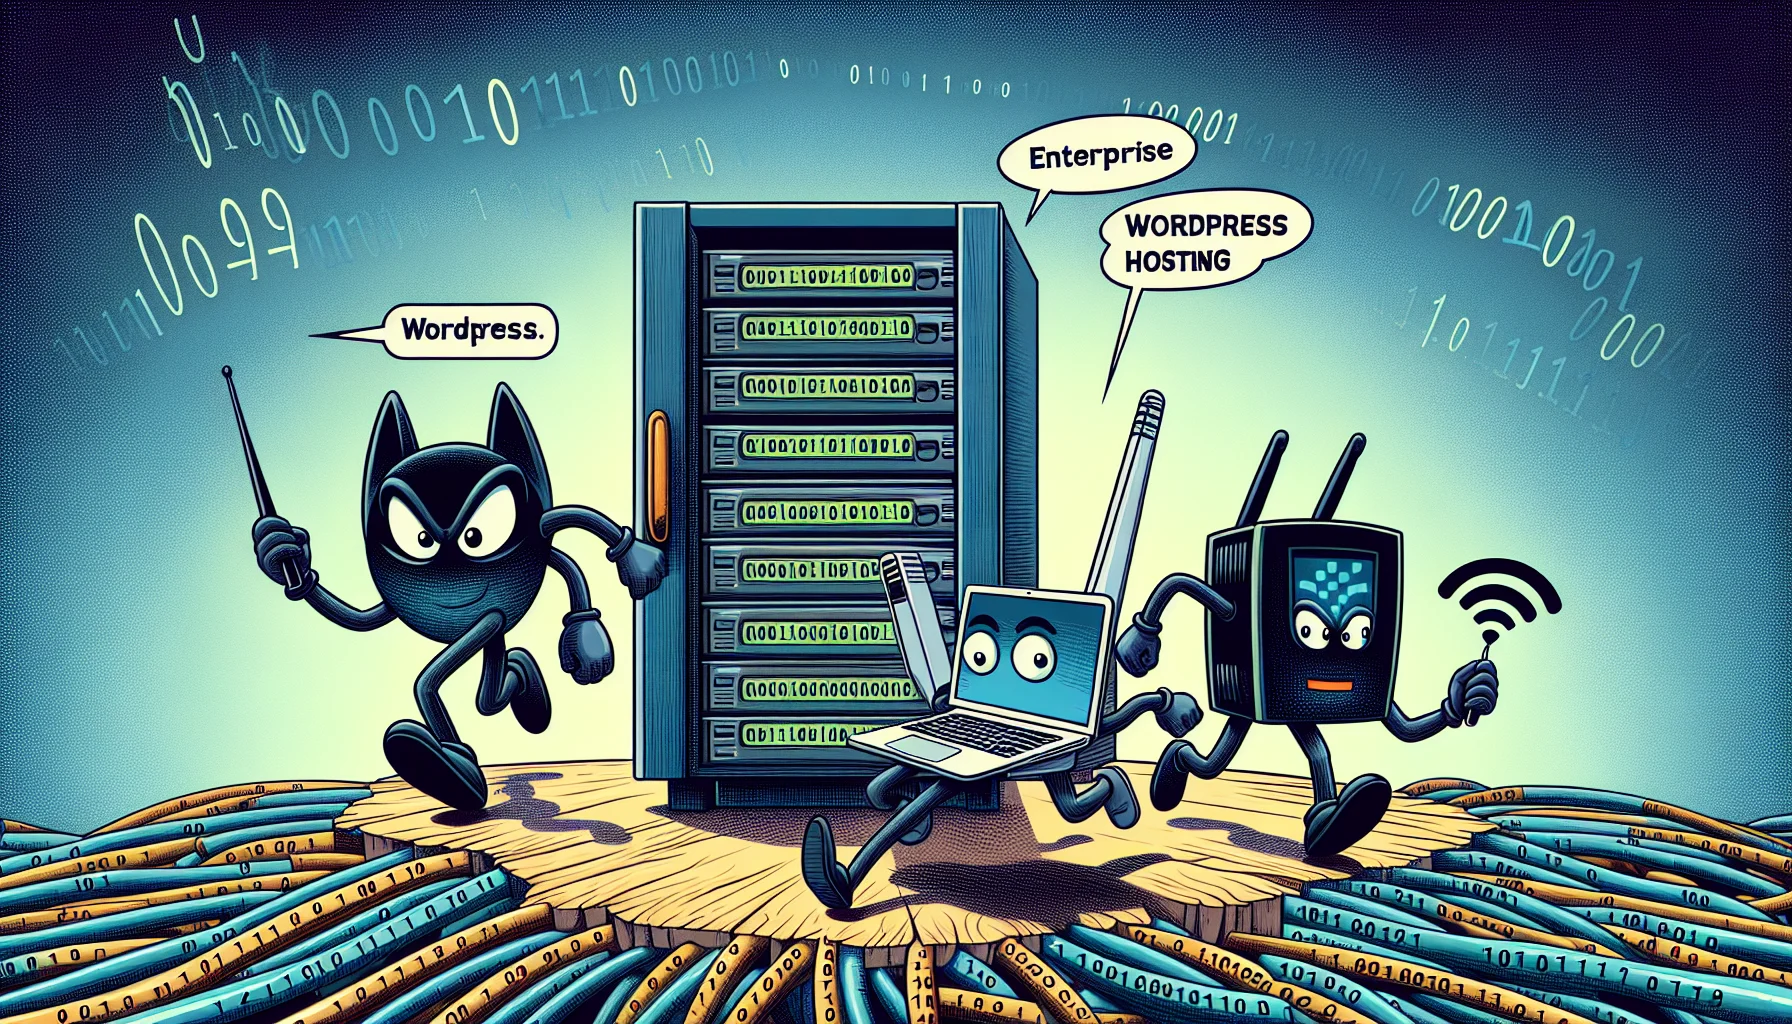 Imagine an entertaining scenario around the concept of enterprise Wordpress hosting. As part of the scene, visualize three anthropomorphic devices - a server rack, a laptop, and a Wi-Fi router - on a comic journey. The server rack, characterized as a diligent, burly entity, leads the team. The spry, energetic laptop eagerly clicks and types away, while the Wi-Fi router, the quirky, somewhat aloof character, beams signals into the ether with gusto. They traverse a landscape made of binary codes and network cables, symbolizing the digital expanse they manage, promoting a sense of inclusivity and collaboration in their web hosting adventure.